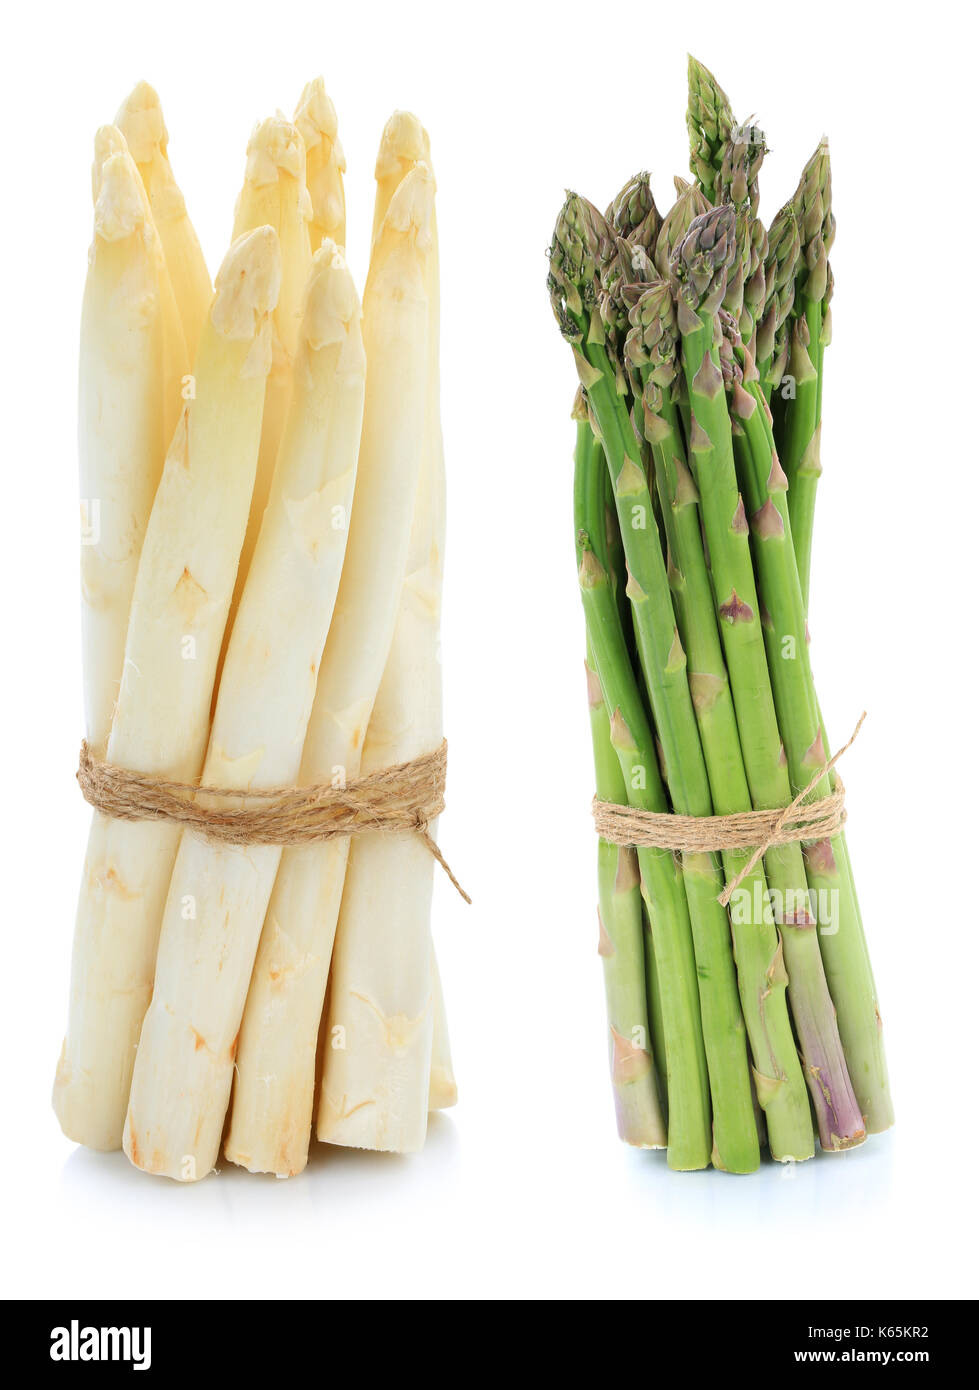 White and green asparagus bunch vegetable isolated on a white background Stock Photo